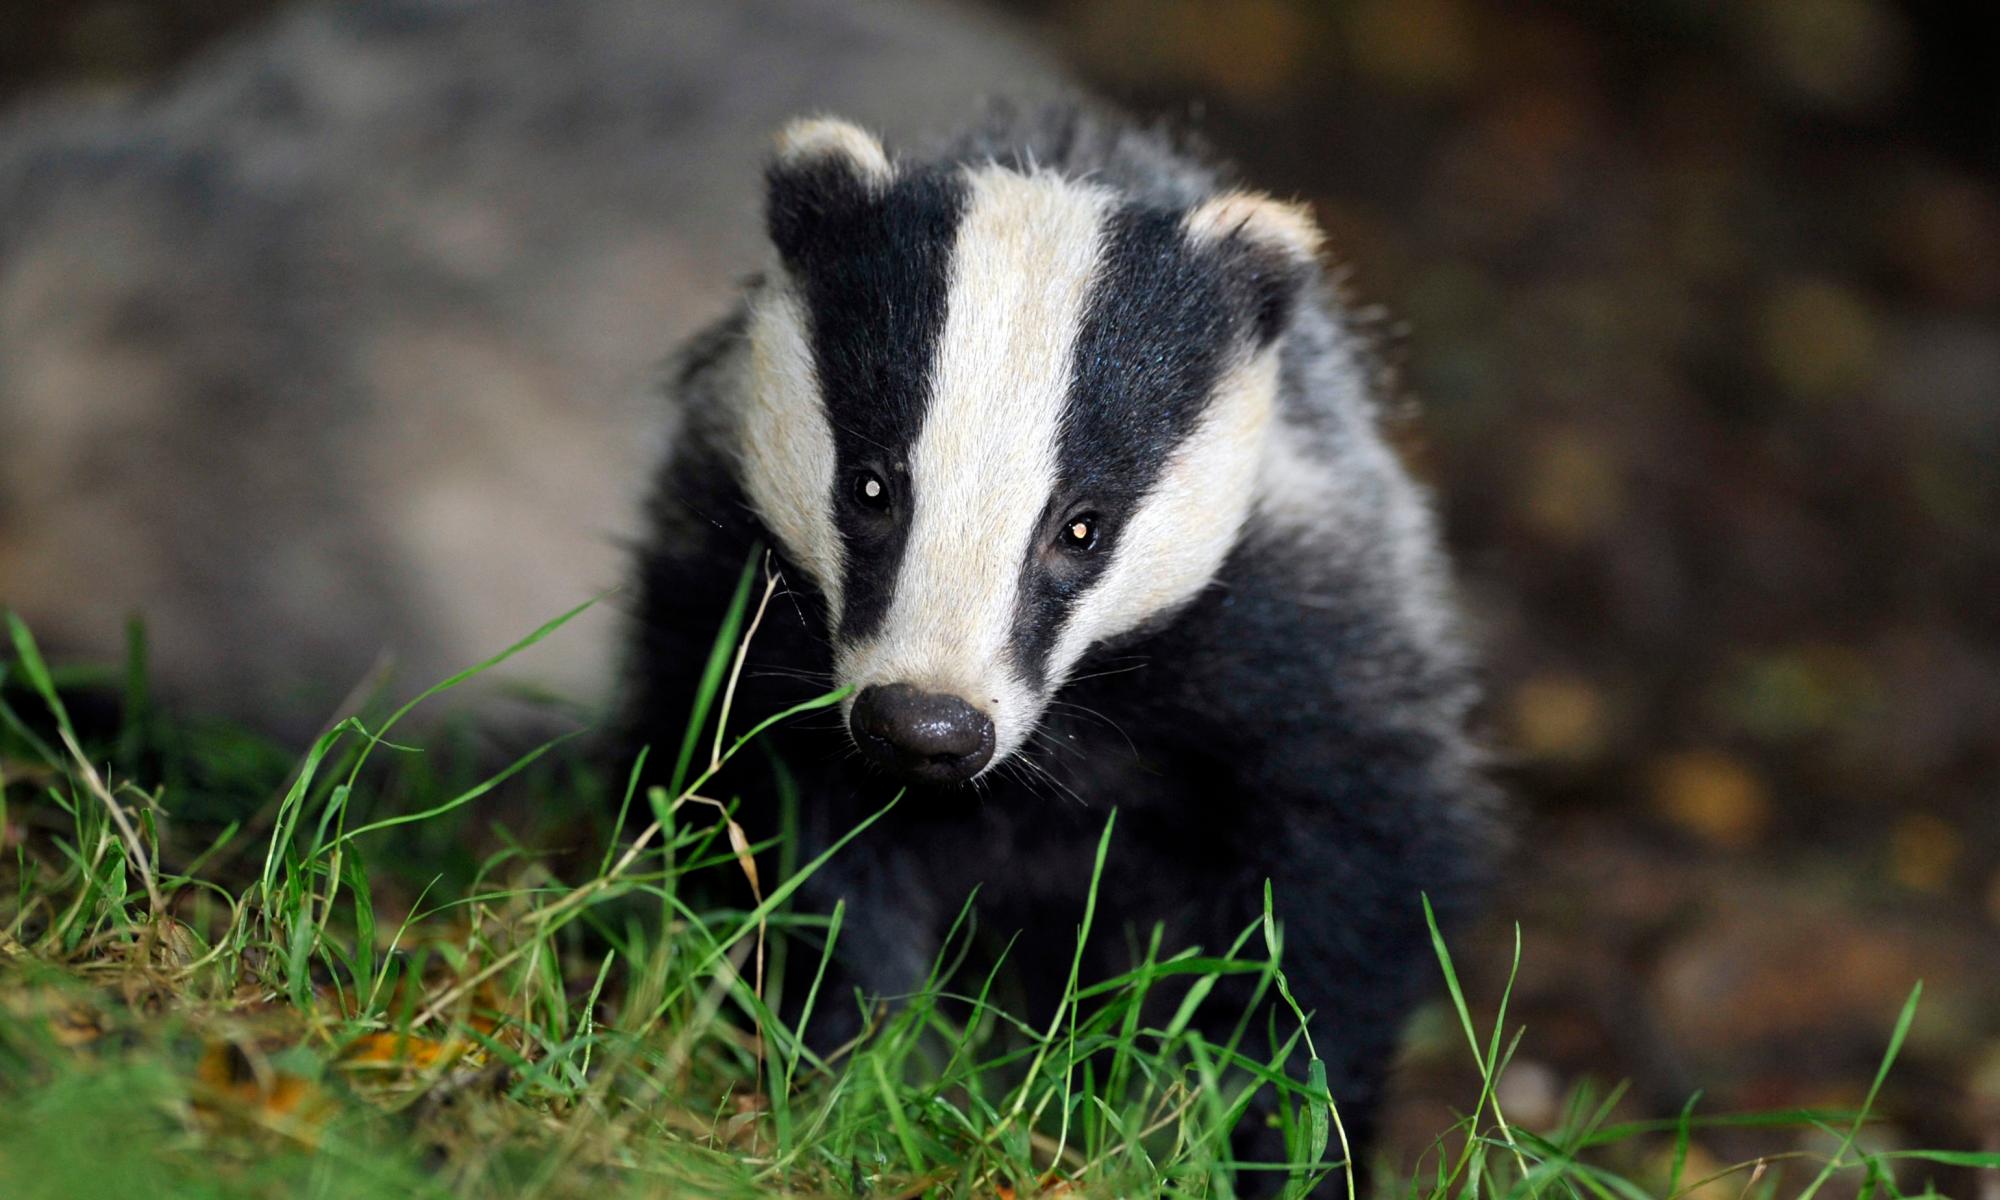 More than 100,000 badgers slaughtered in discredited cull policy